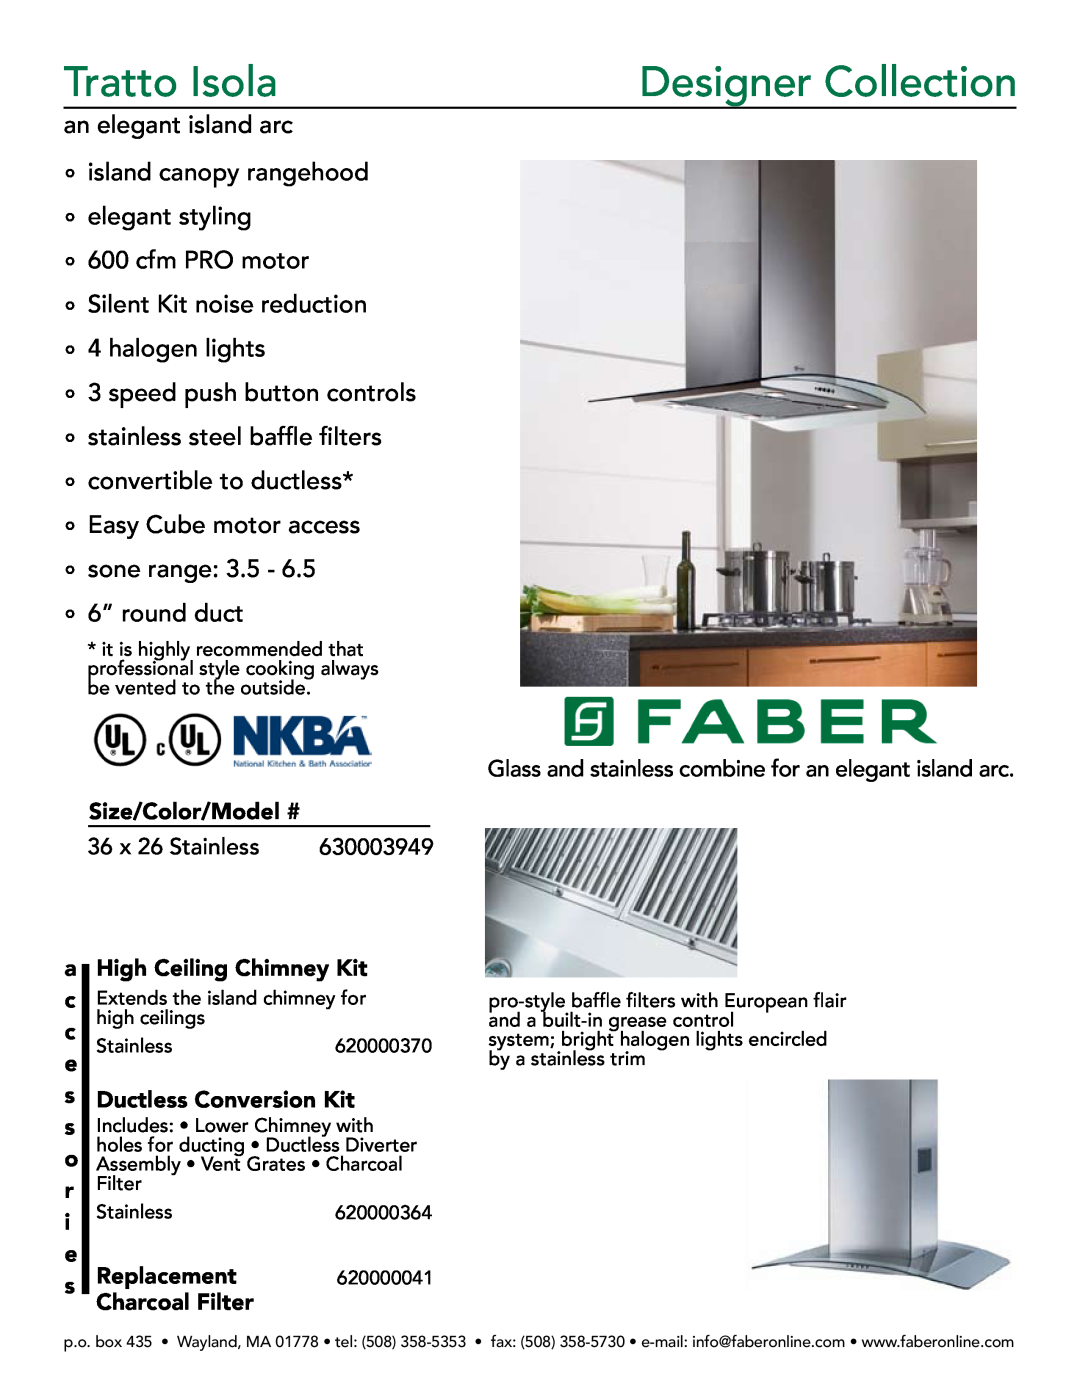 Faber 630003949 manual Size/Color/Model #, a c c e s s o r i e s, High Ceiling Chimney Kit, Ductless Conversion Kit 